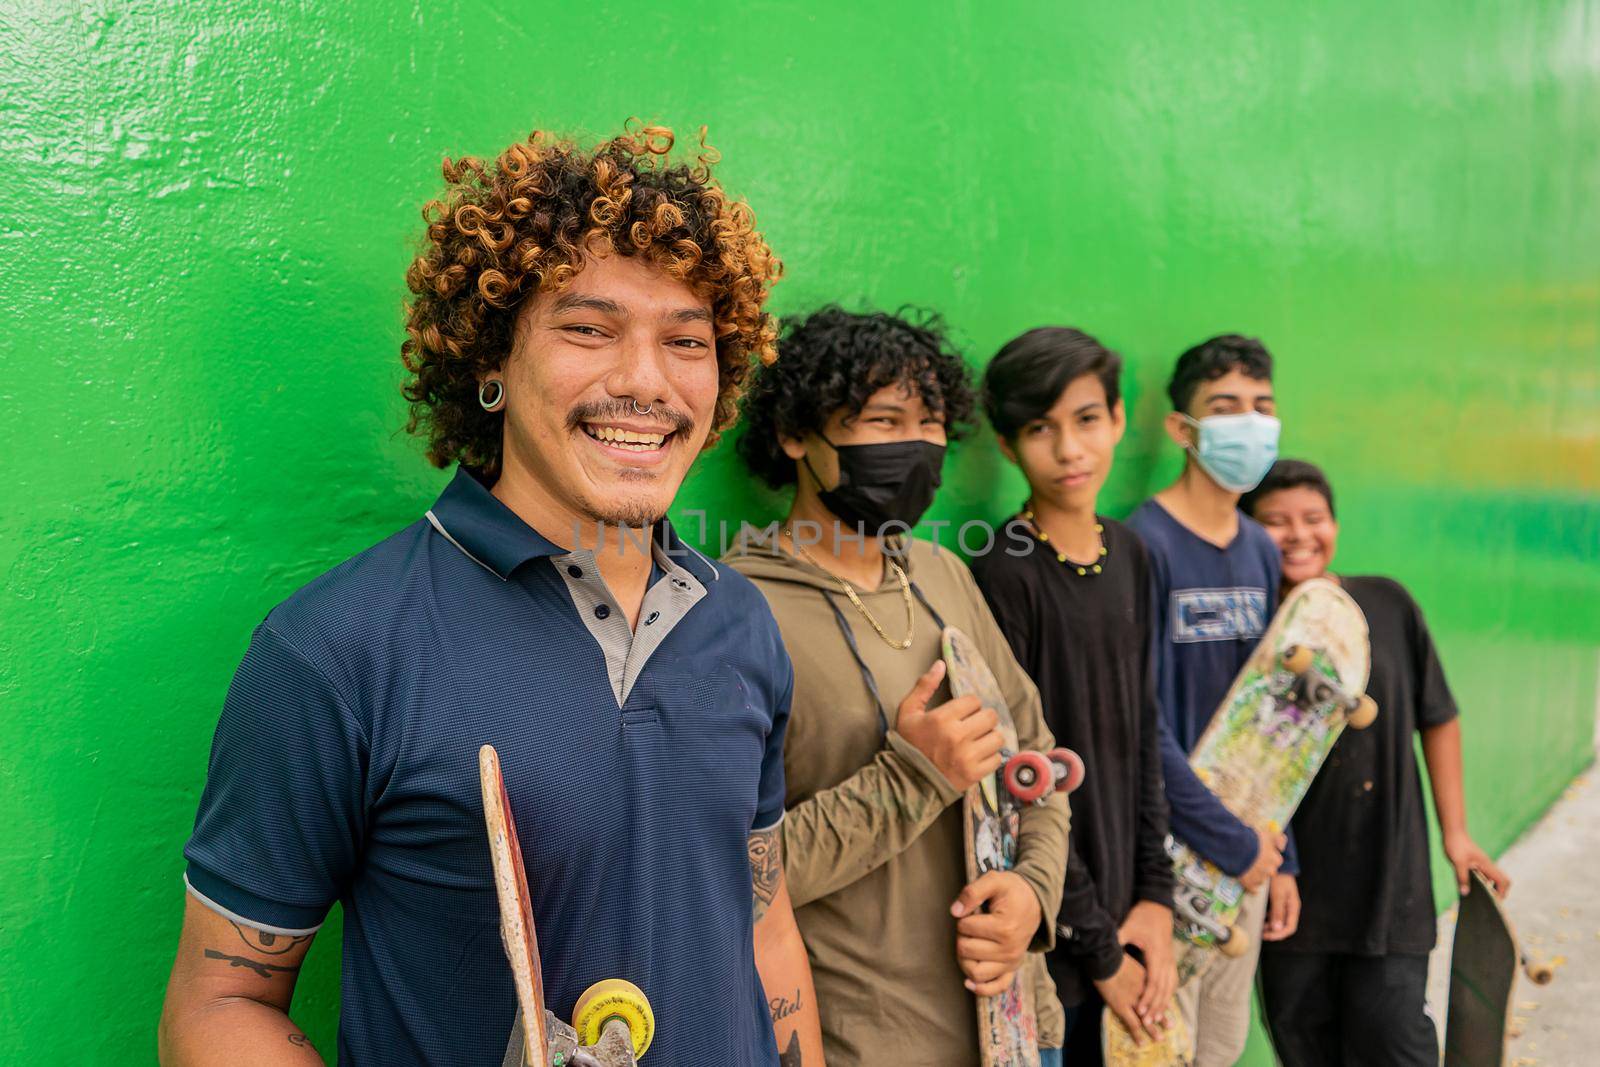 Group of skater teenagers and children smiling and holding their boards in front of a green wall